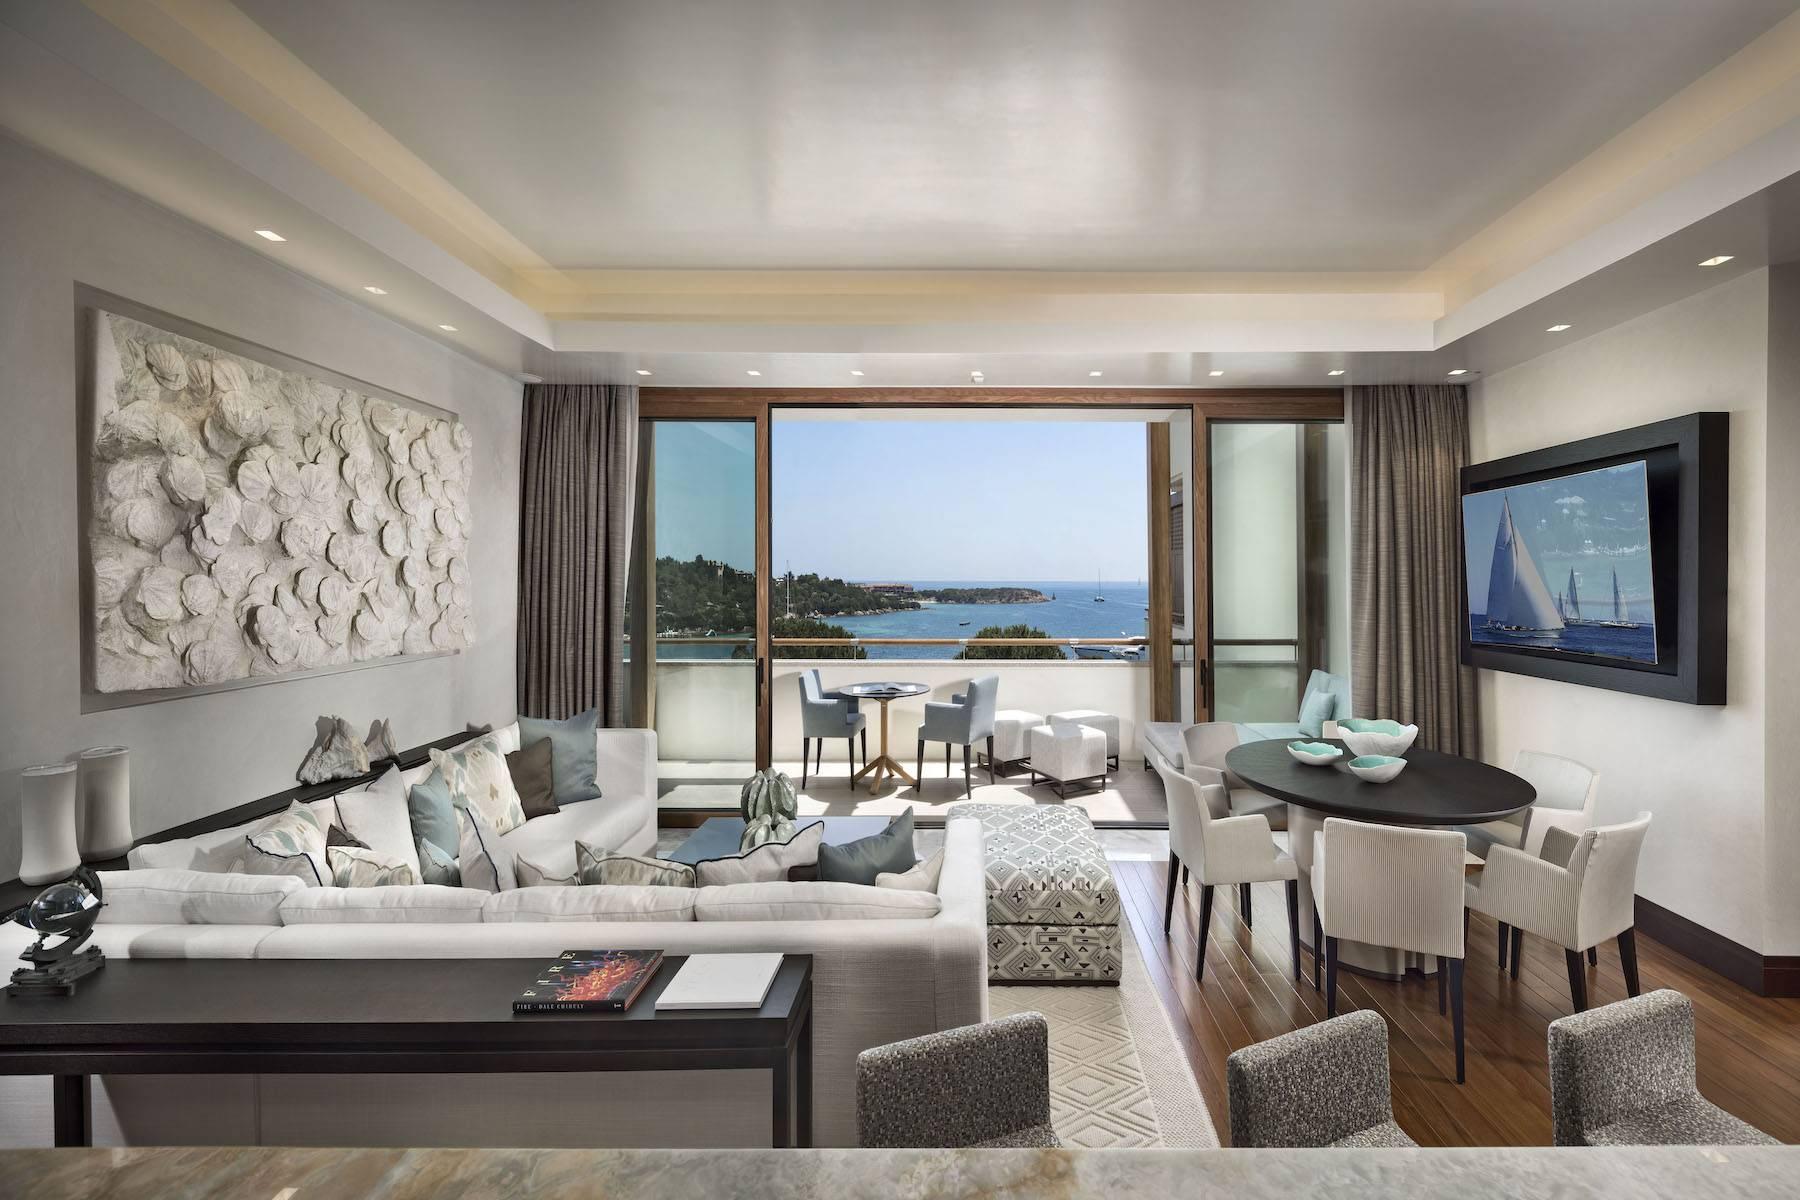 Presidential Suite - with a view over the Porto Cervo Harbour - 6